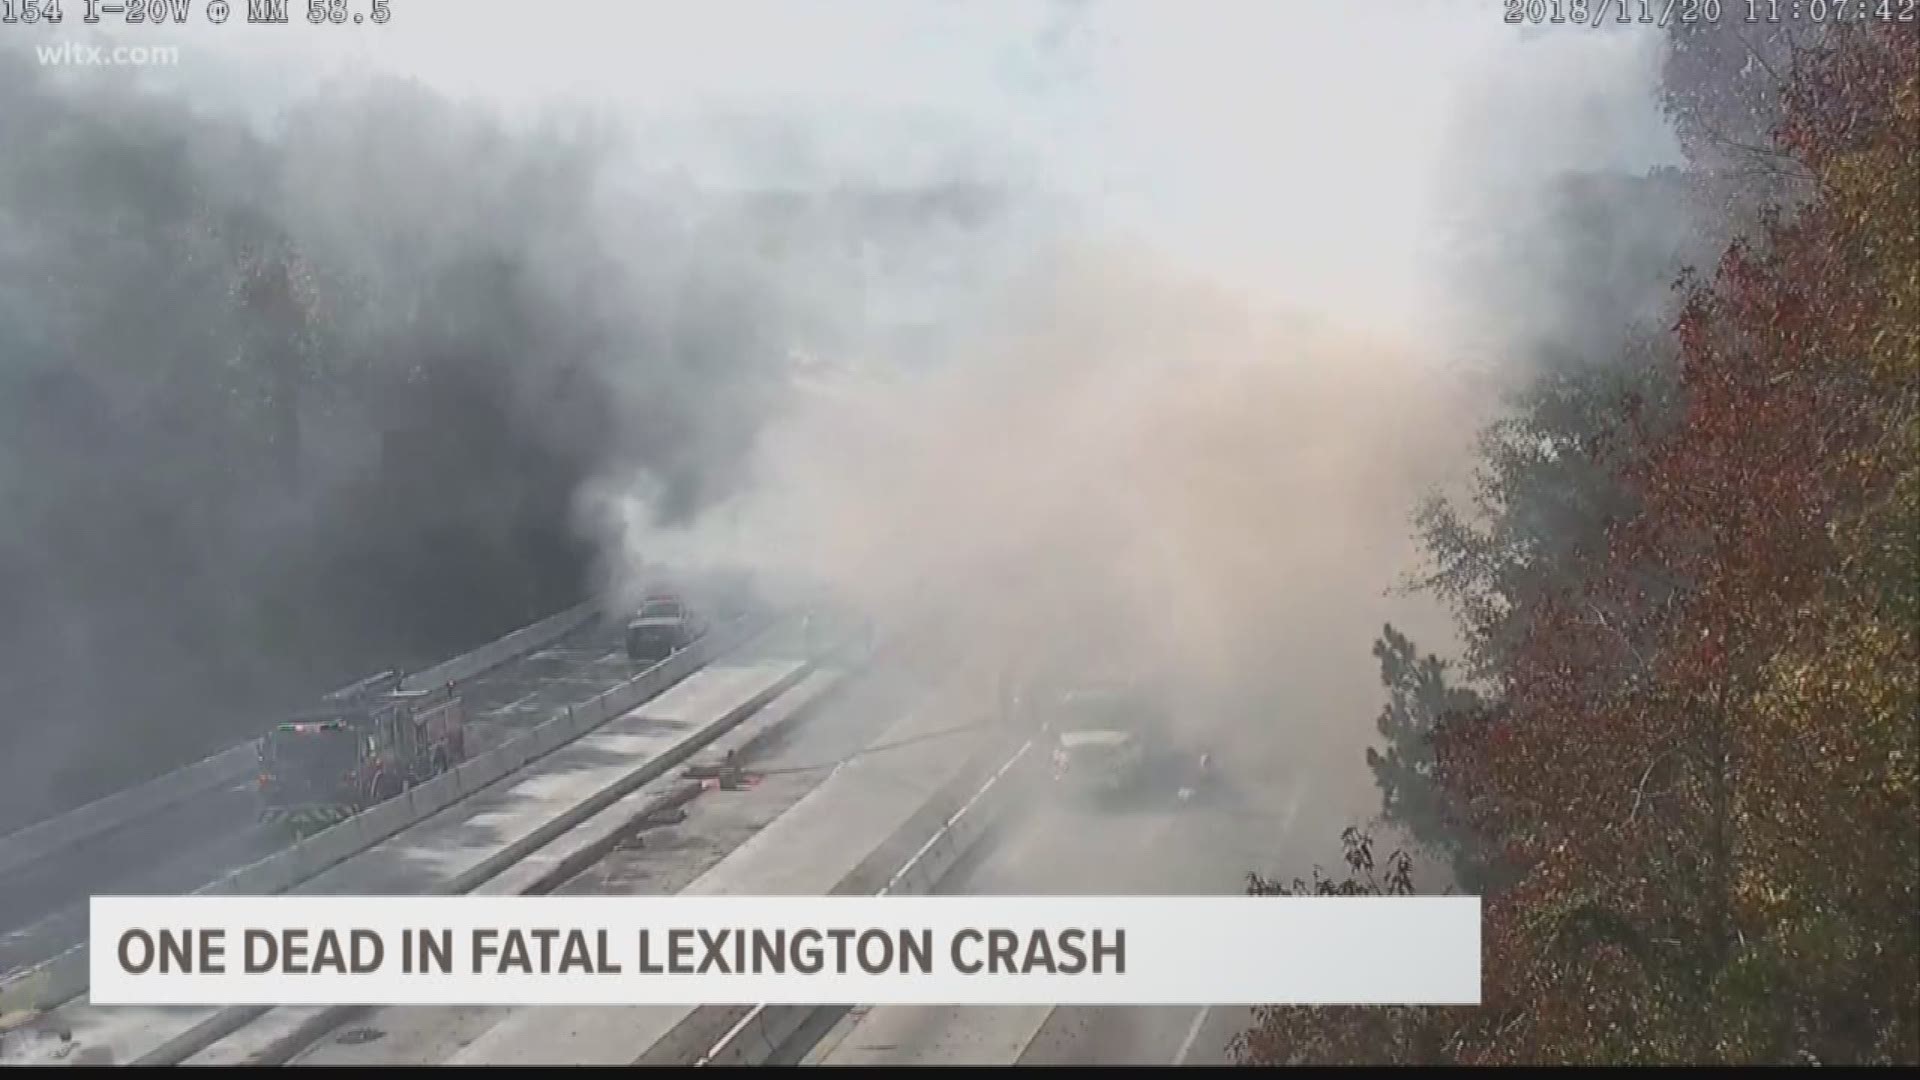 The person who died after a collision on I-20 in Lexington county has been identified